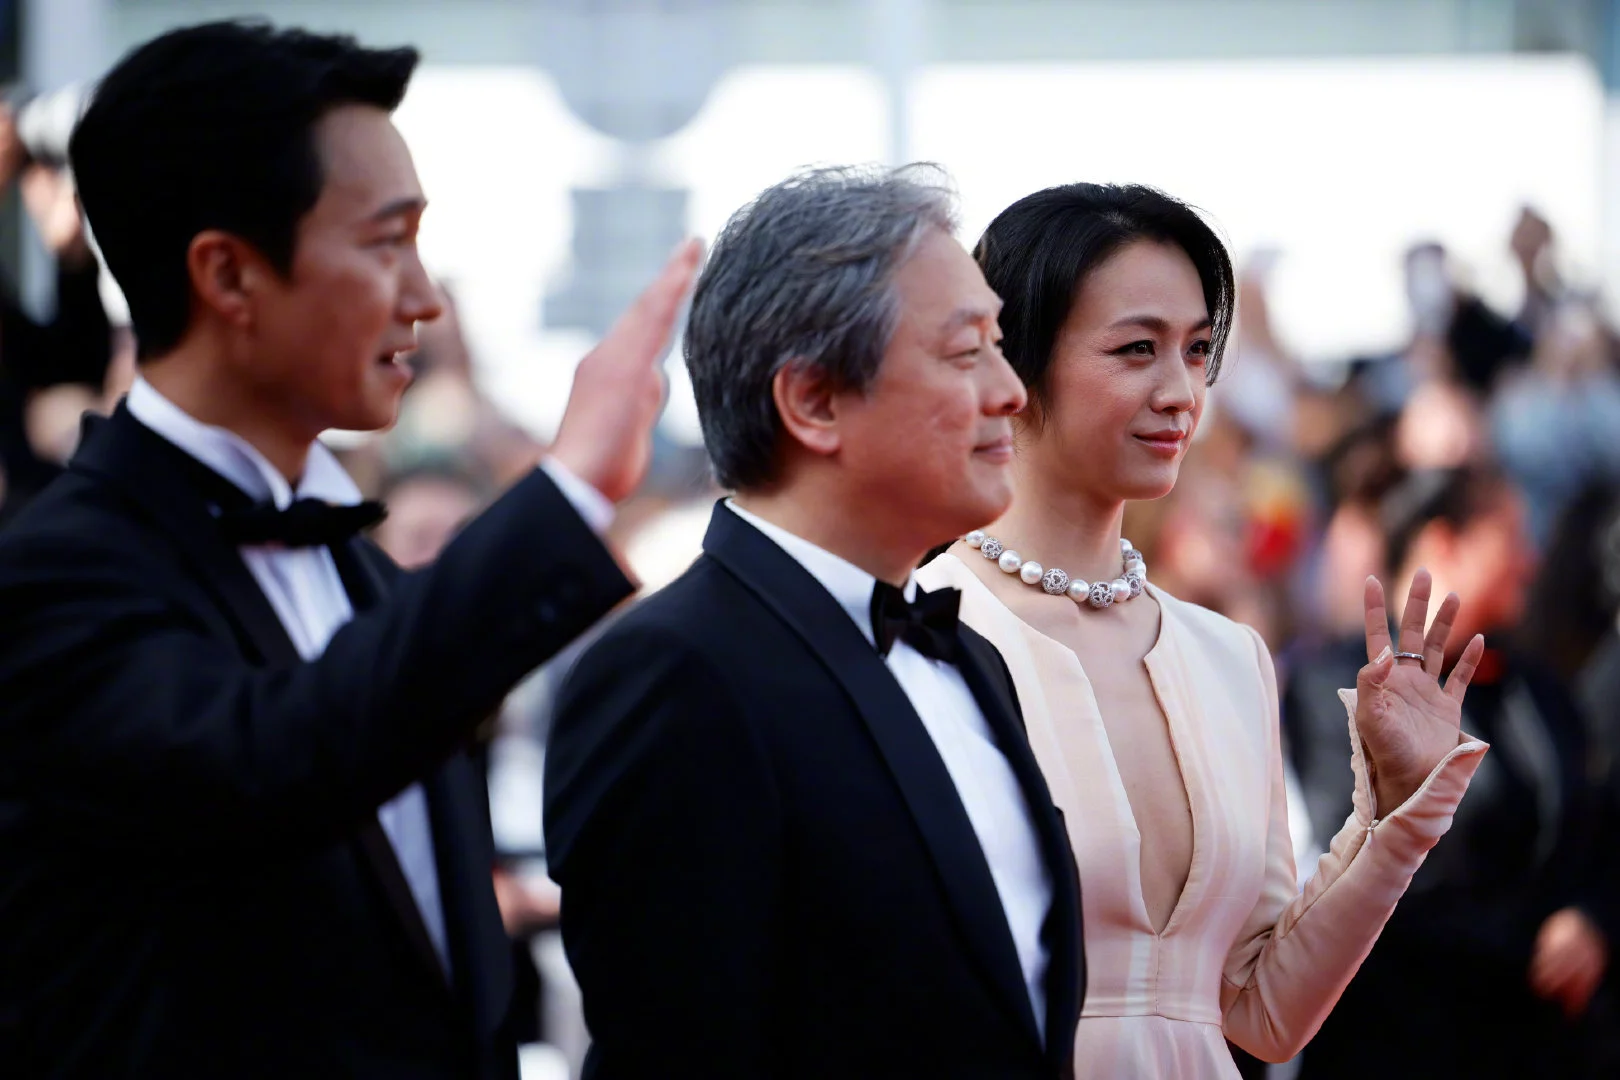 "Decision To Leave" crew and Wei Tang on the red carpet at this year's Cannes Film Festival